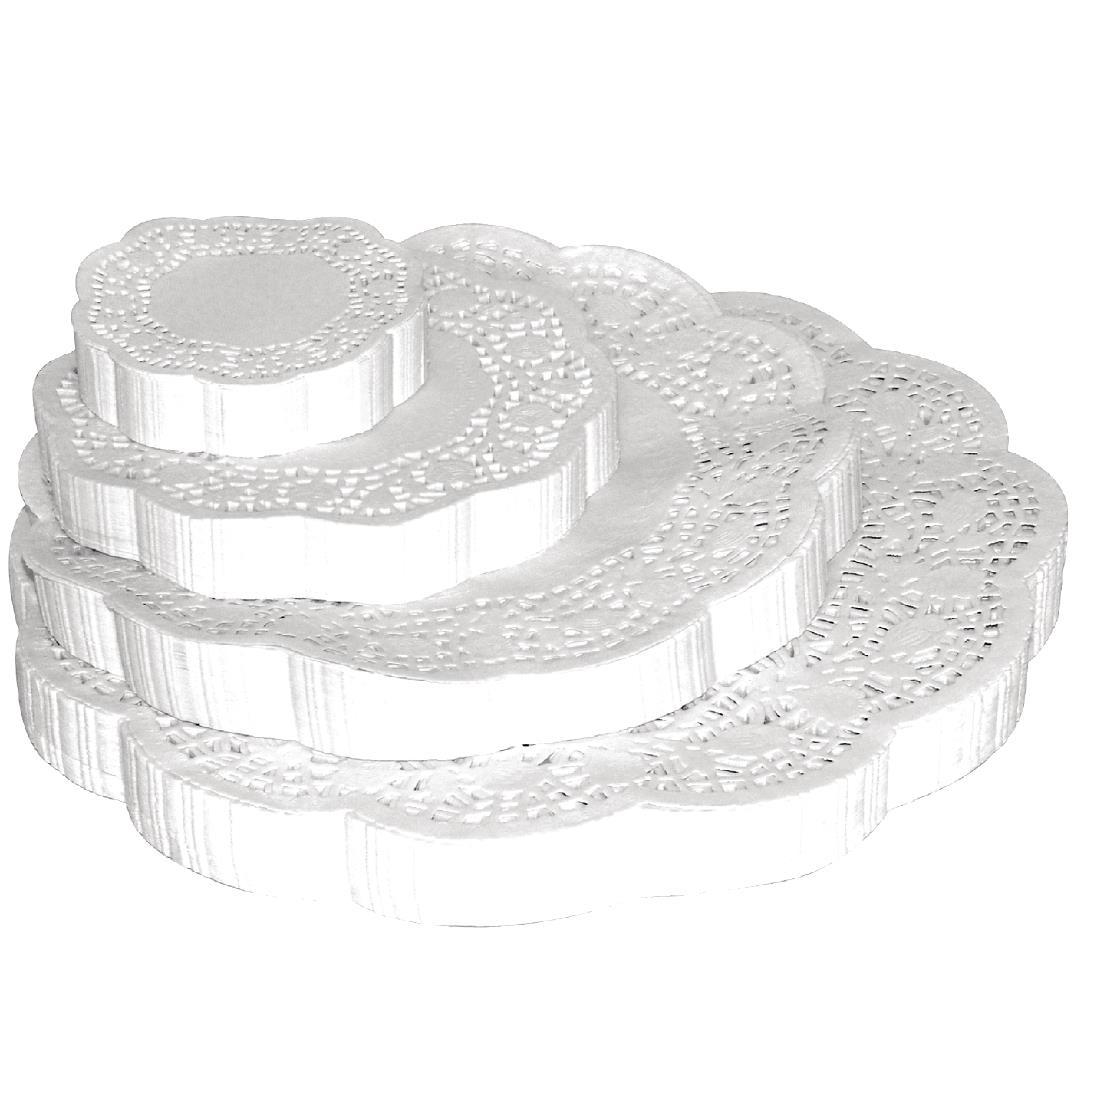 Fiesta Round Paper Doilies 240mm (Pack of 250) - CE992  - 2